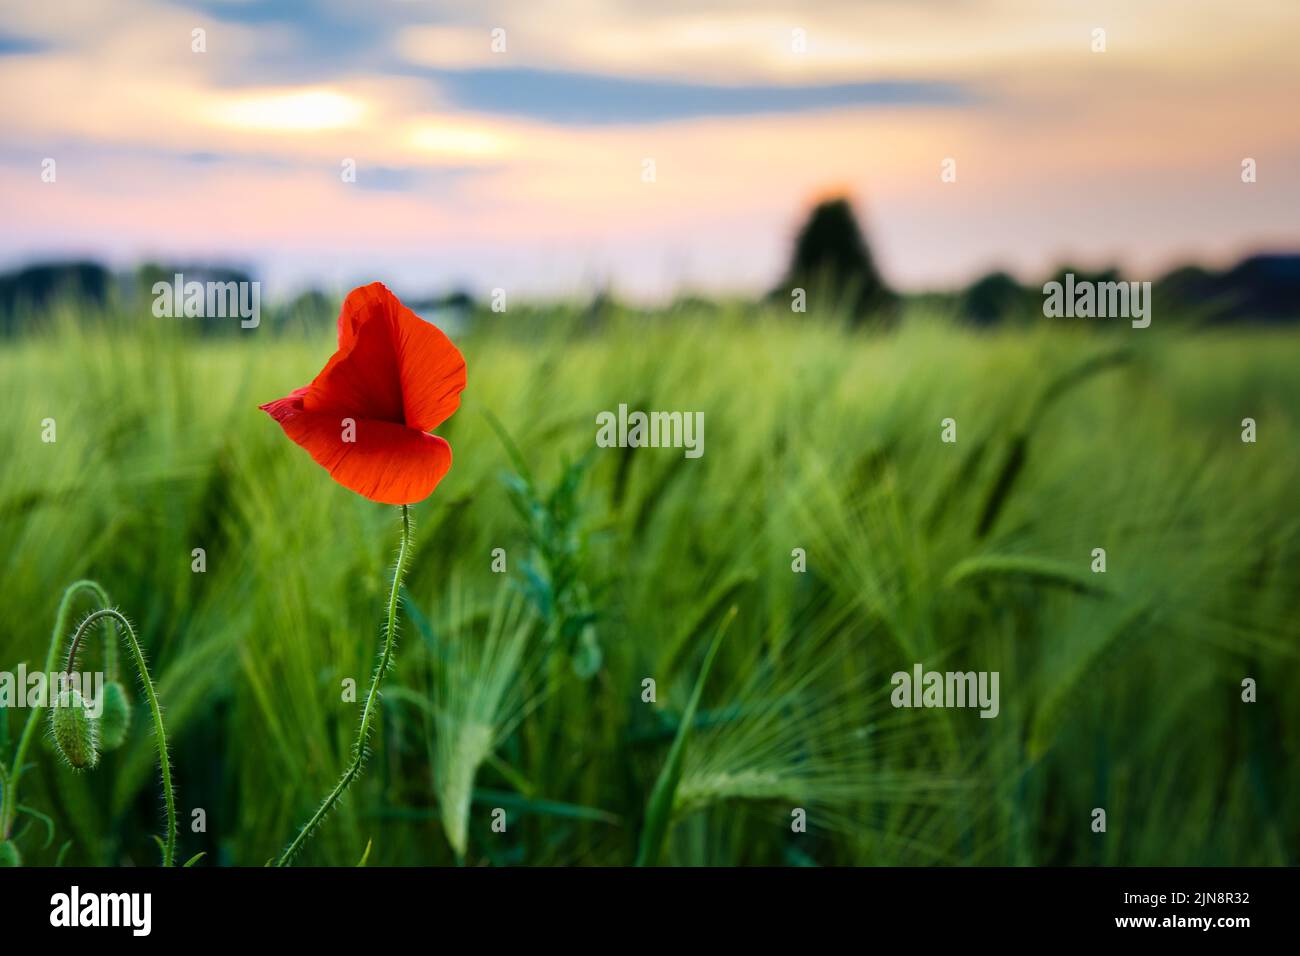 A beautiful view of a poppy blooming in the field at the sunset Stock Photo